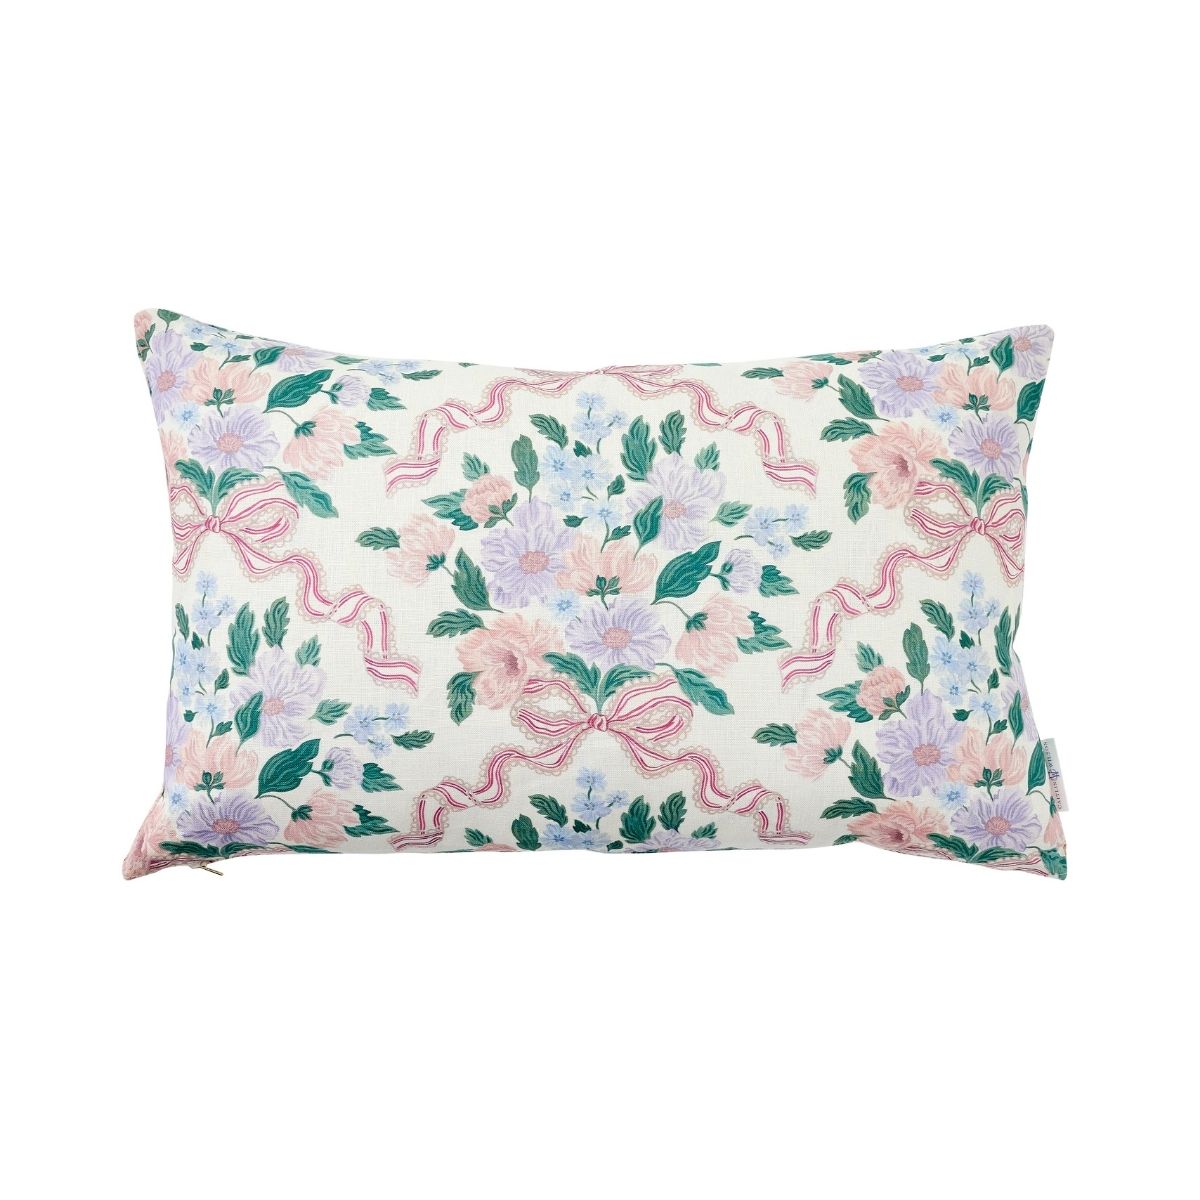 Holly Berry & Bow Pillow